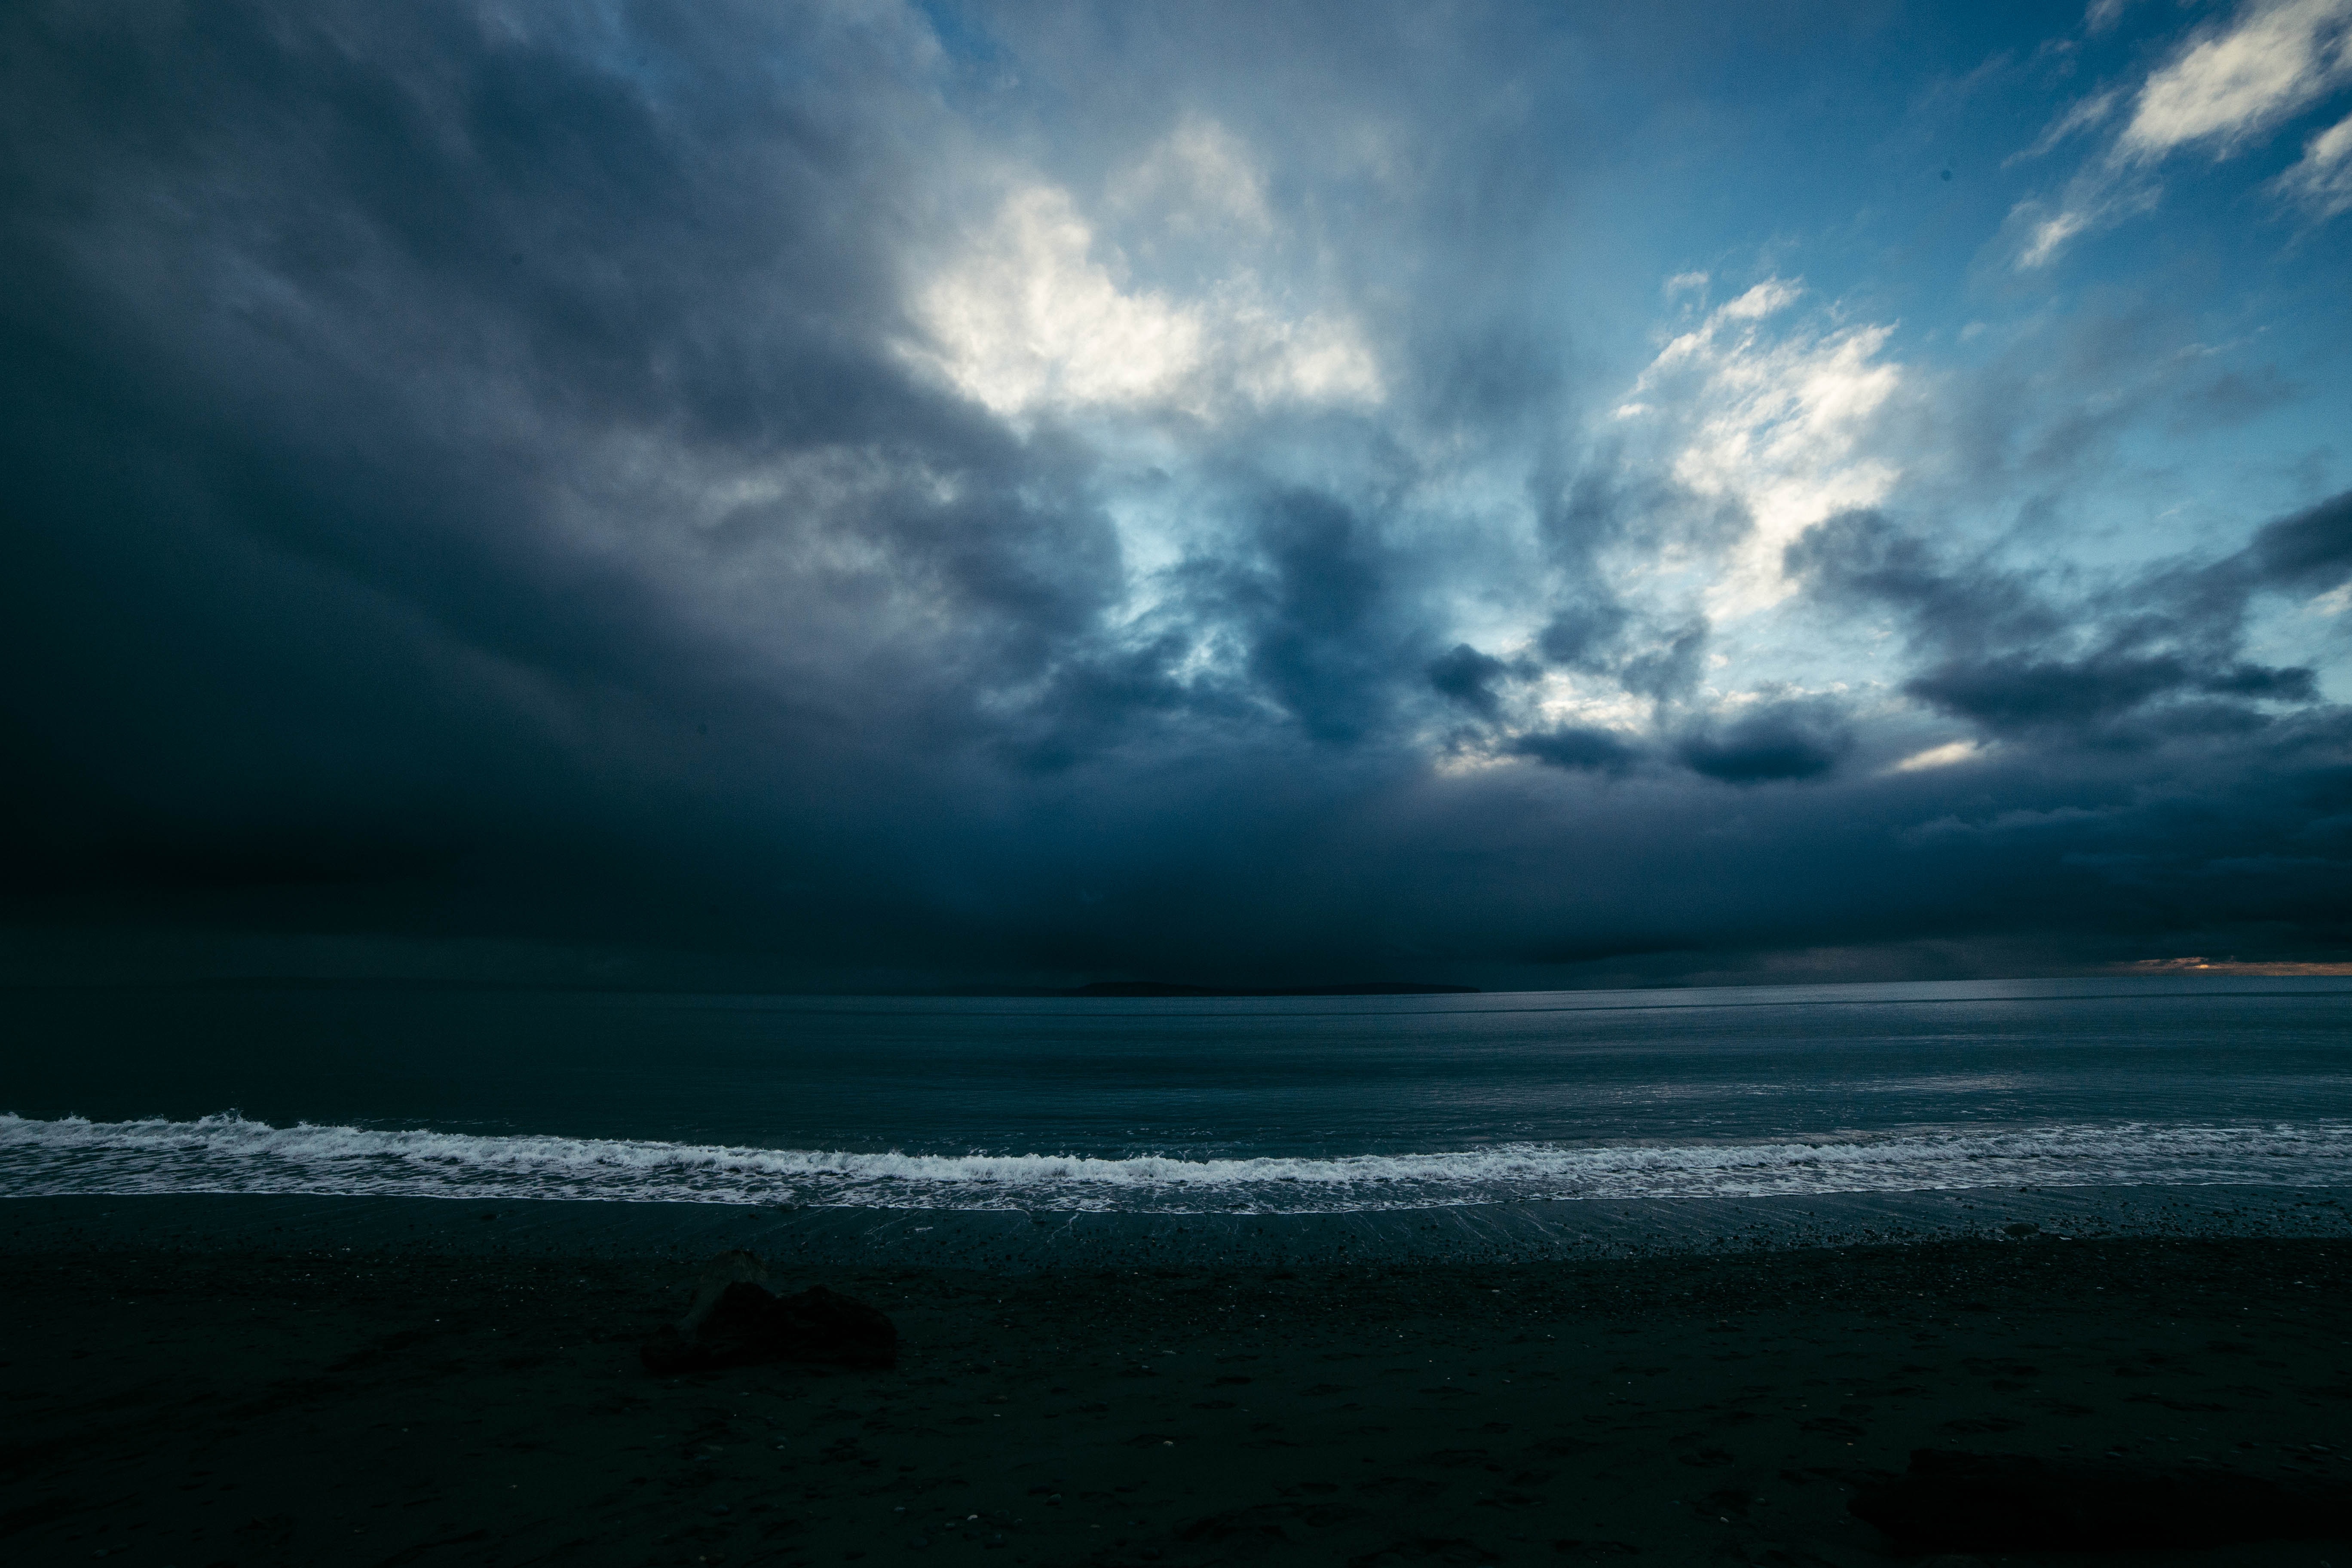 night, surf, shore, bank, overcast, nature, mainly cloudy, sea